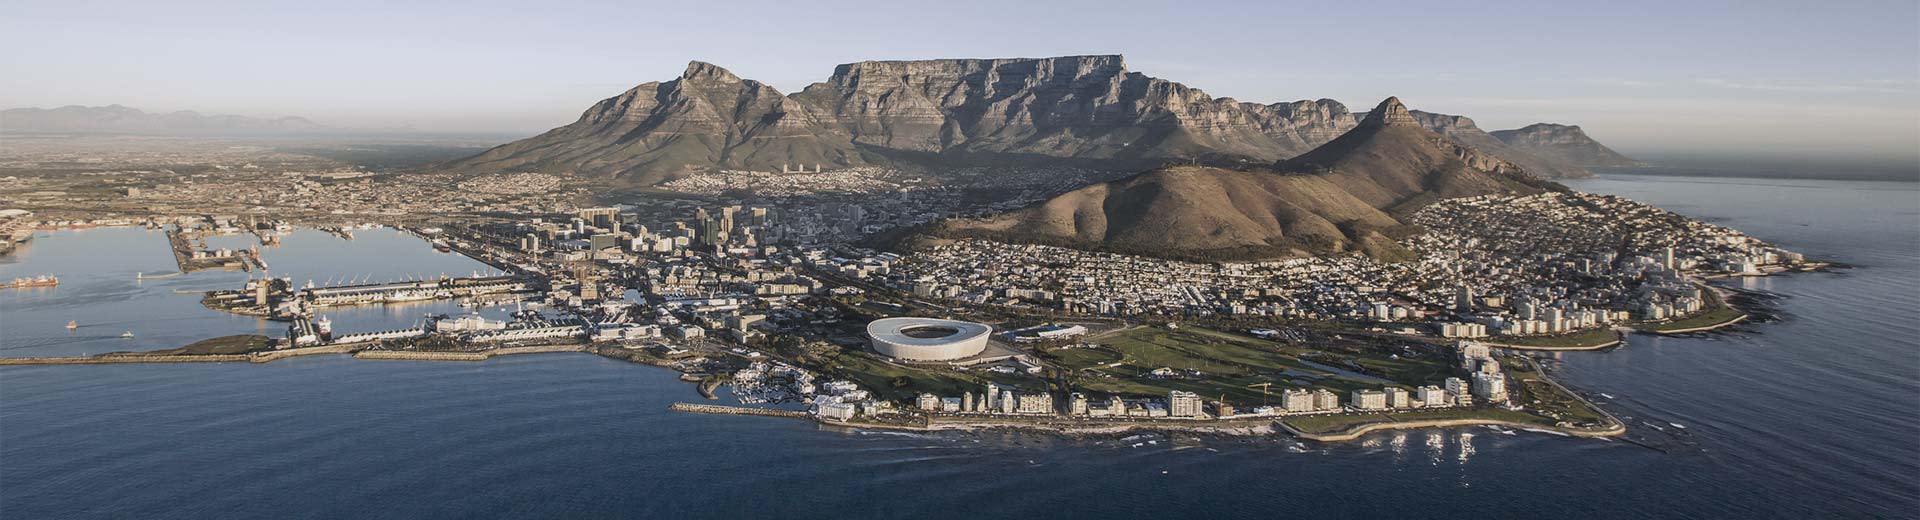 The famous Table Mountain behind the sprawling metropolis of Cape Town.